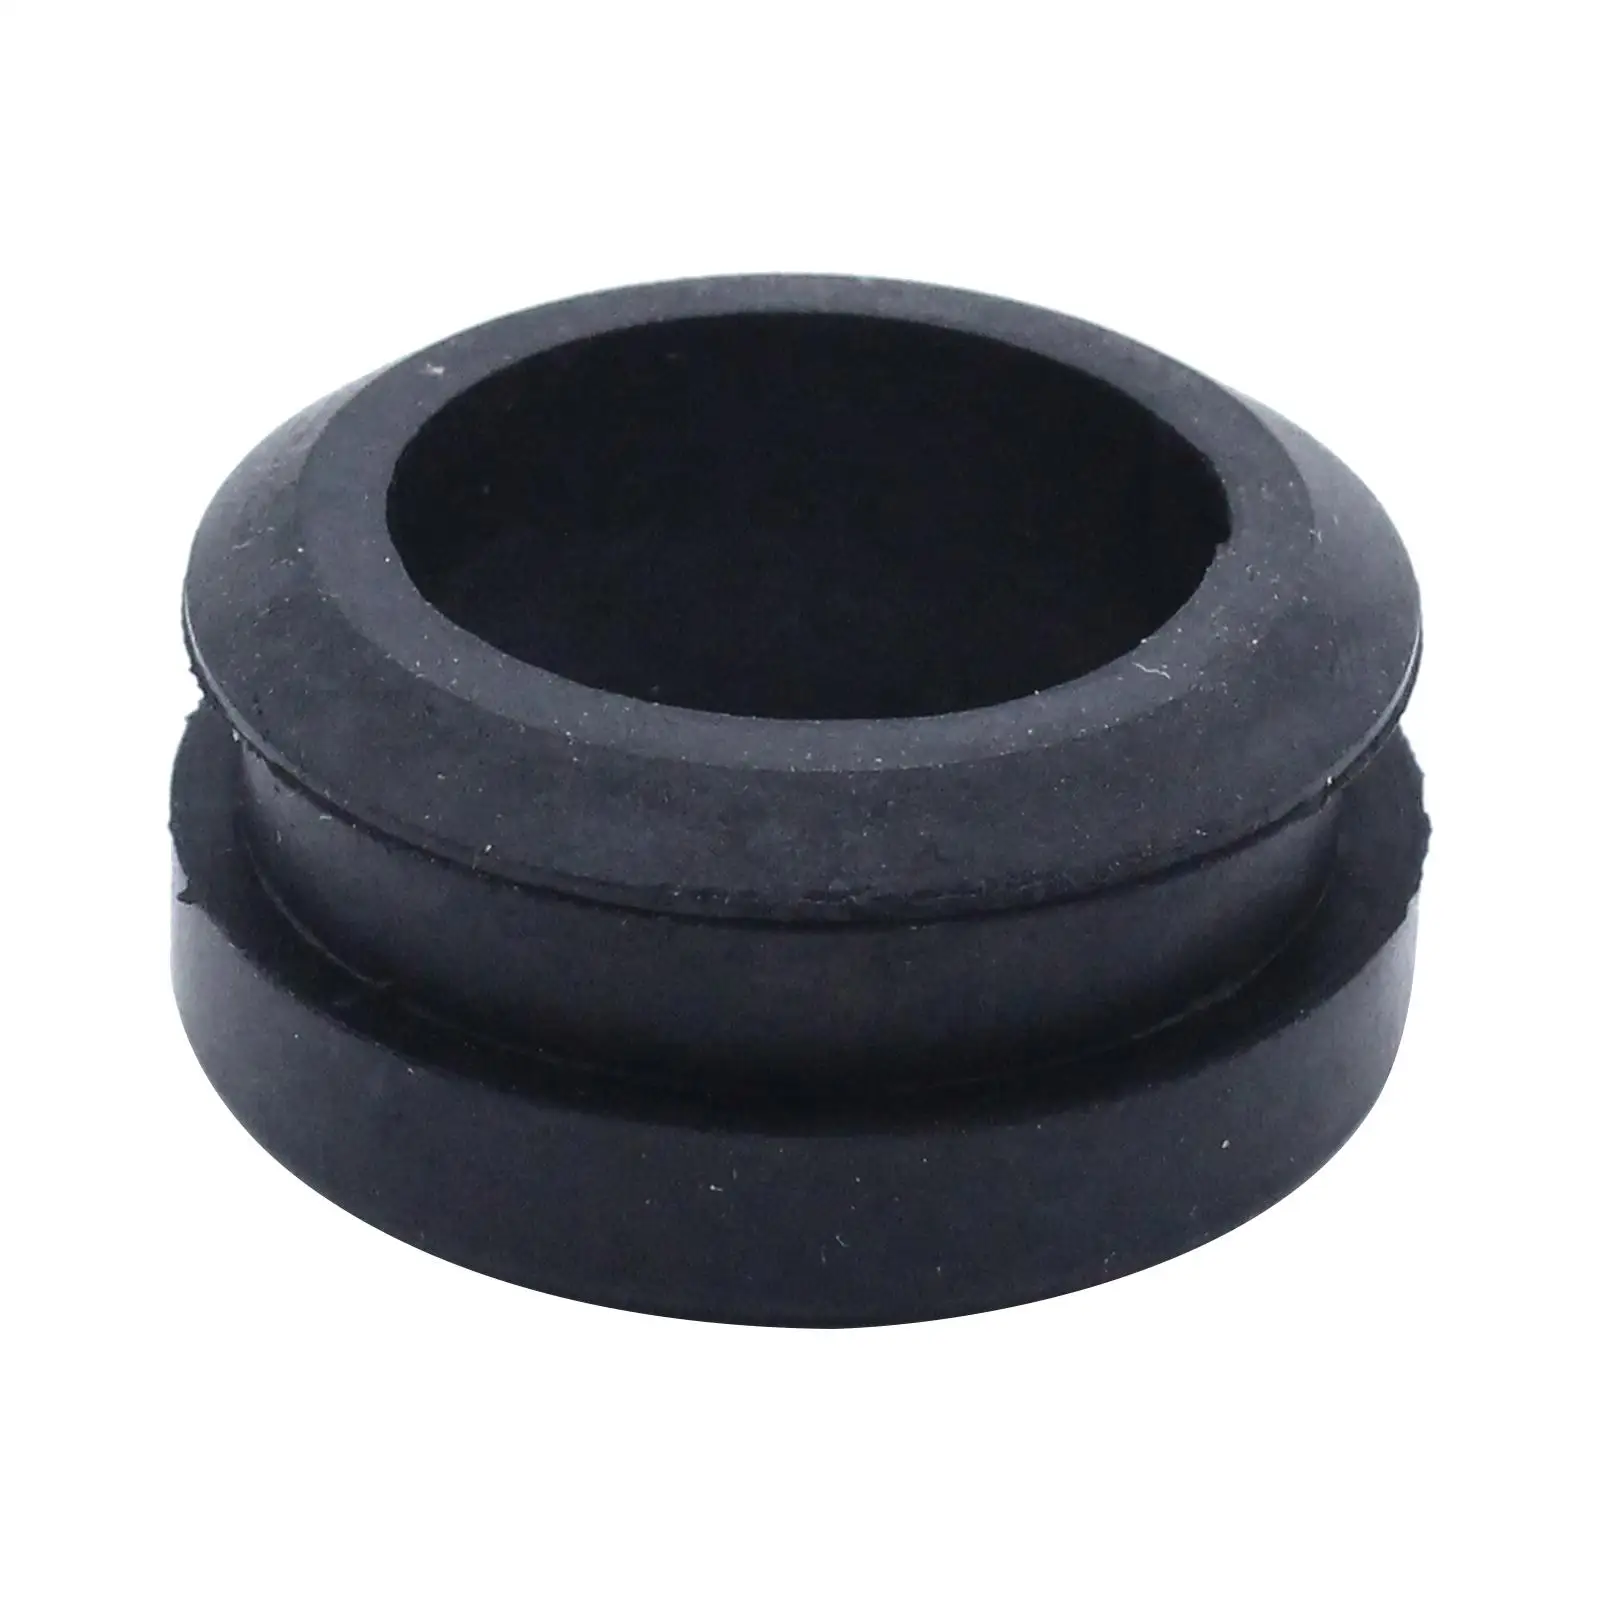 Rubber Breather Grommets Valve Cover Grommets Fit Valve Covers